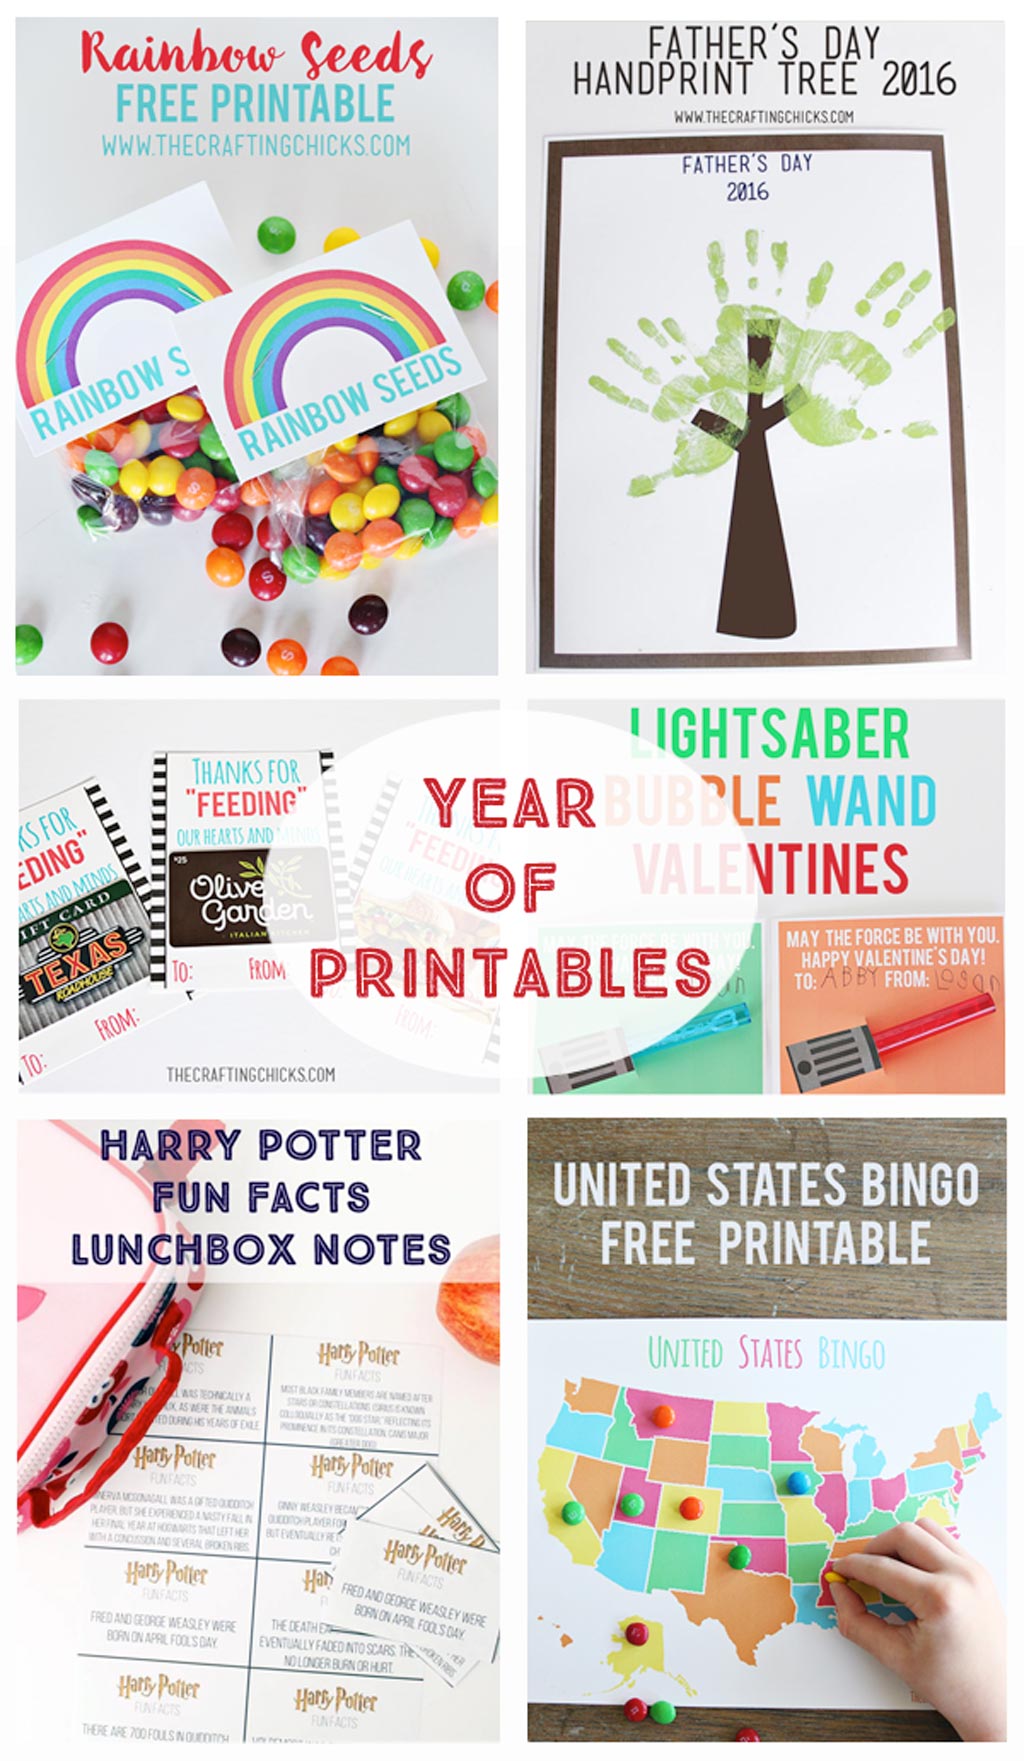 http://thecraftingchicks.com/wp-content/uploads/2016/12/Year-of-Printables.jpg